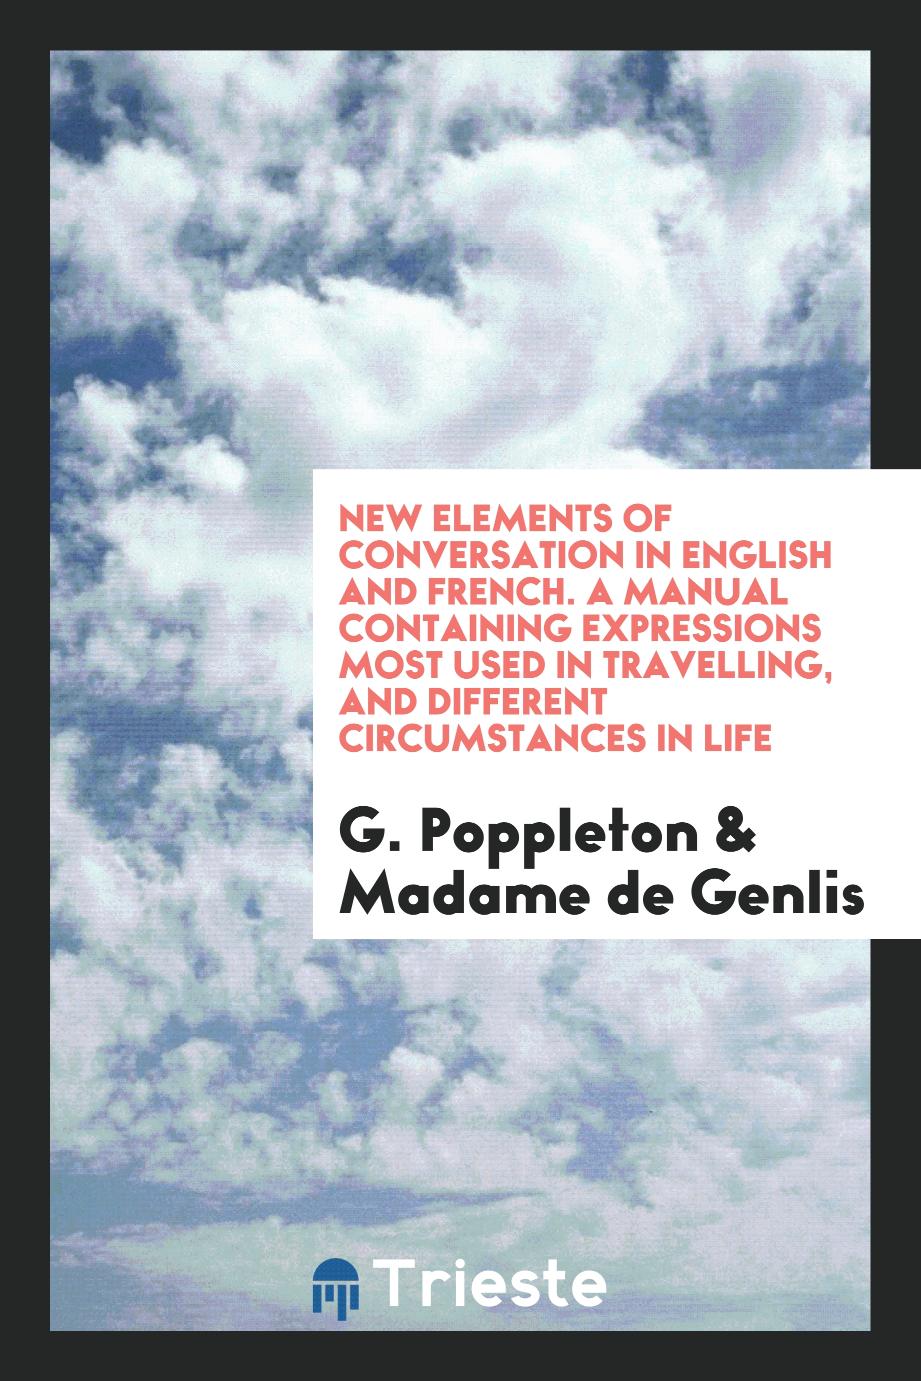 New Elements of Conversation in English and French. A Manual Containing Expressions Most Used in Travelling, and Different Circumstances in Life